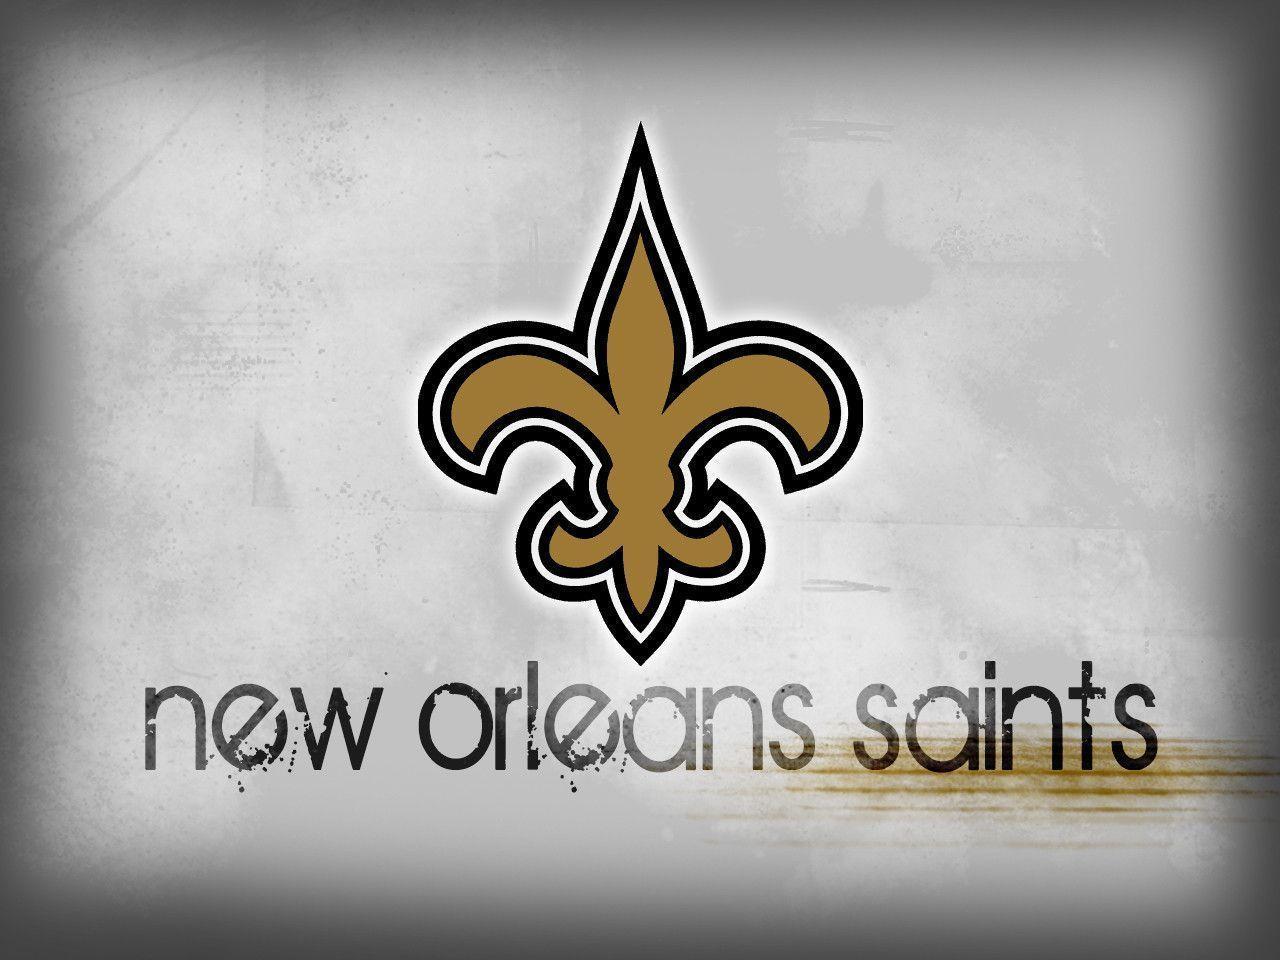 New Orleans Saints Wallpapers 64211 Best HD Wallpapers